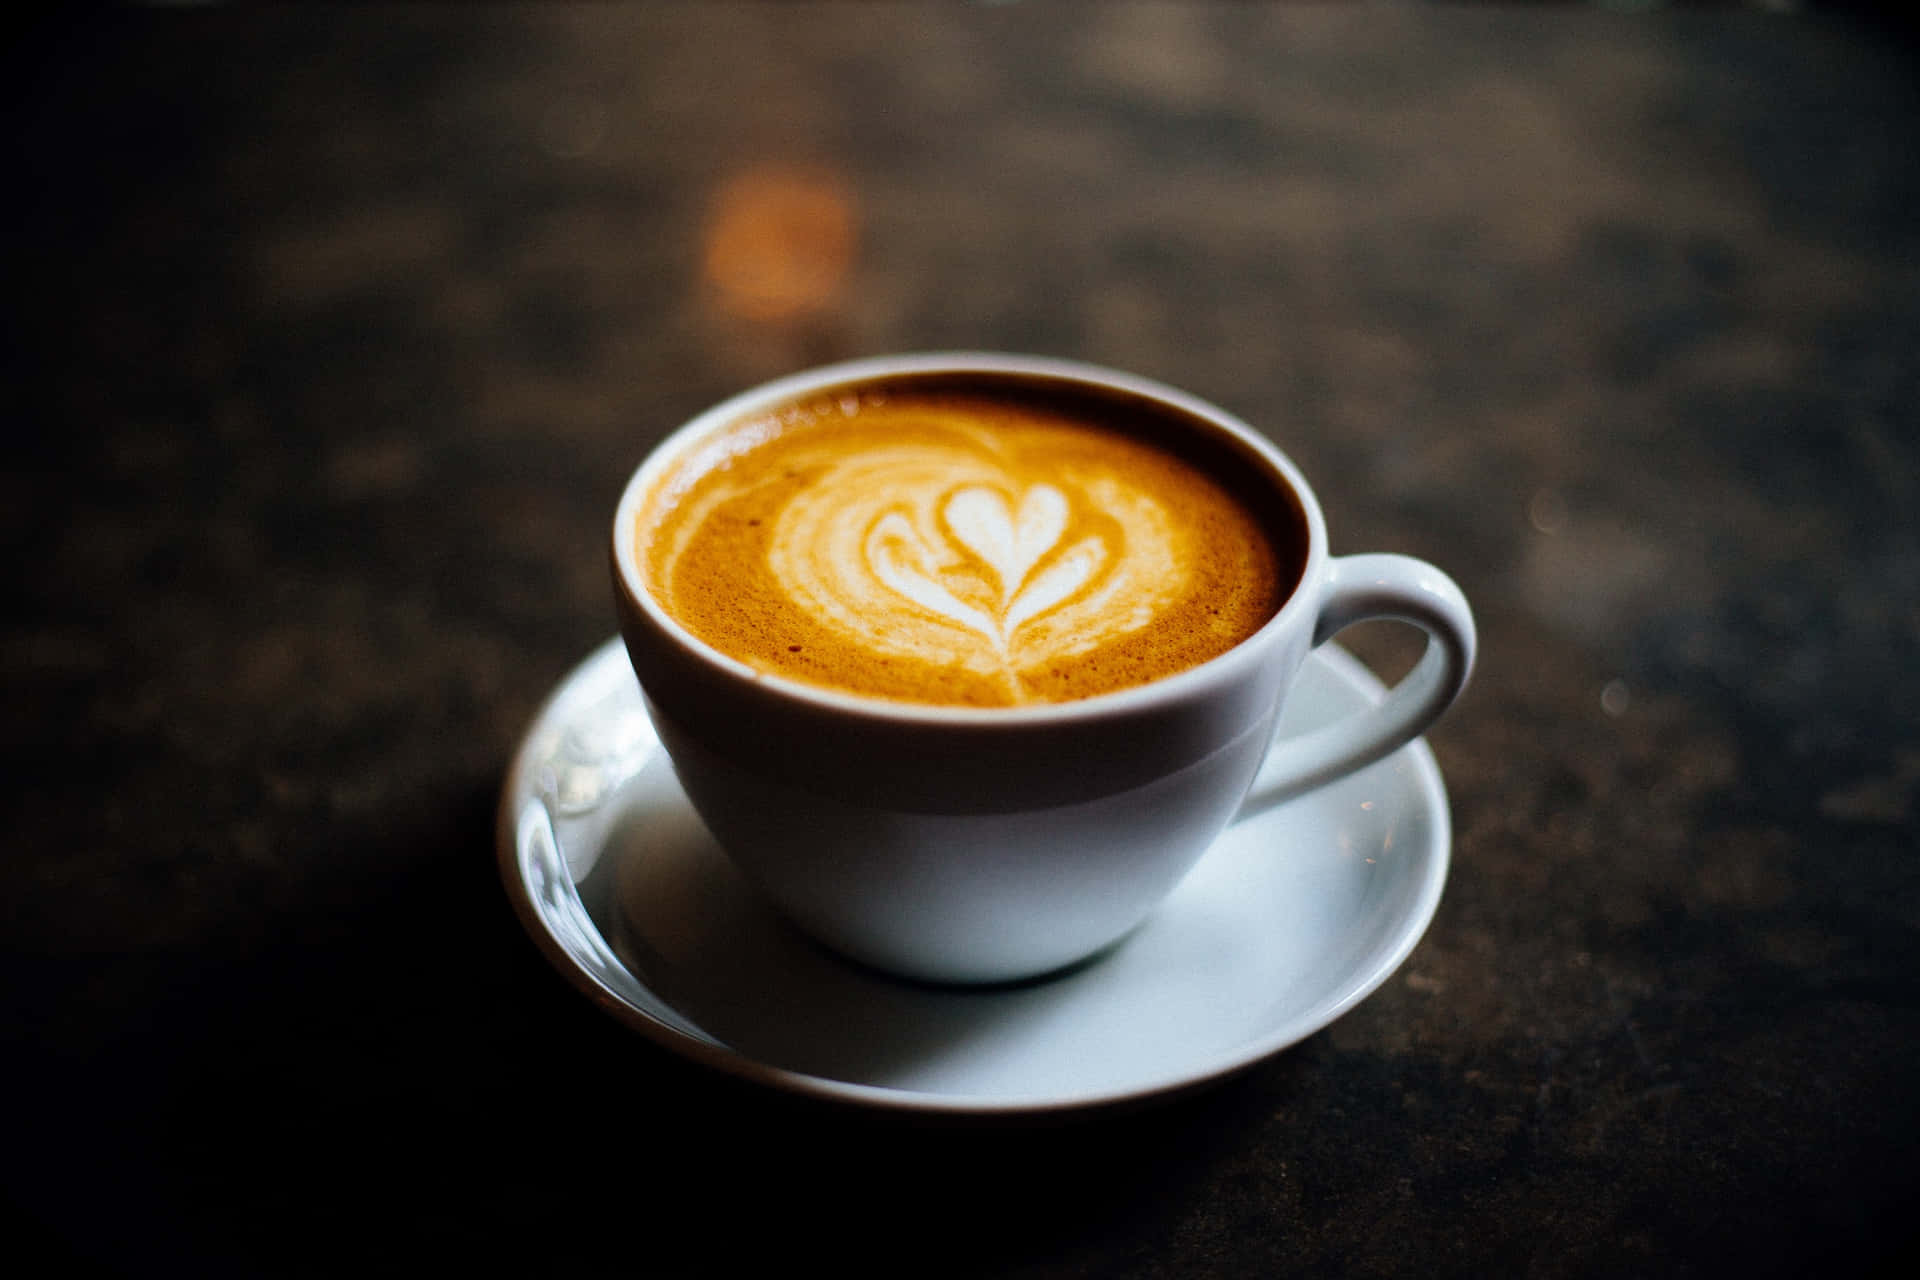 Savor Every Delicious Moment with a Cup of Coffee